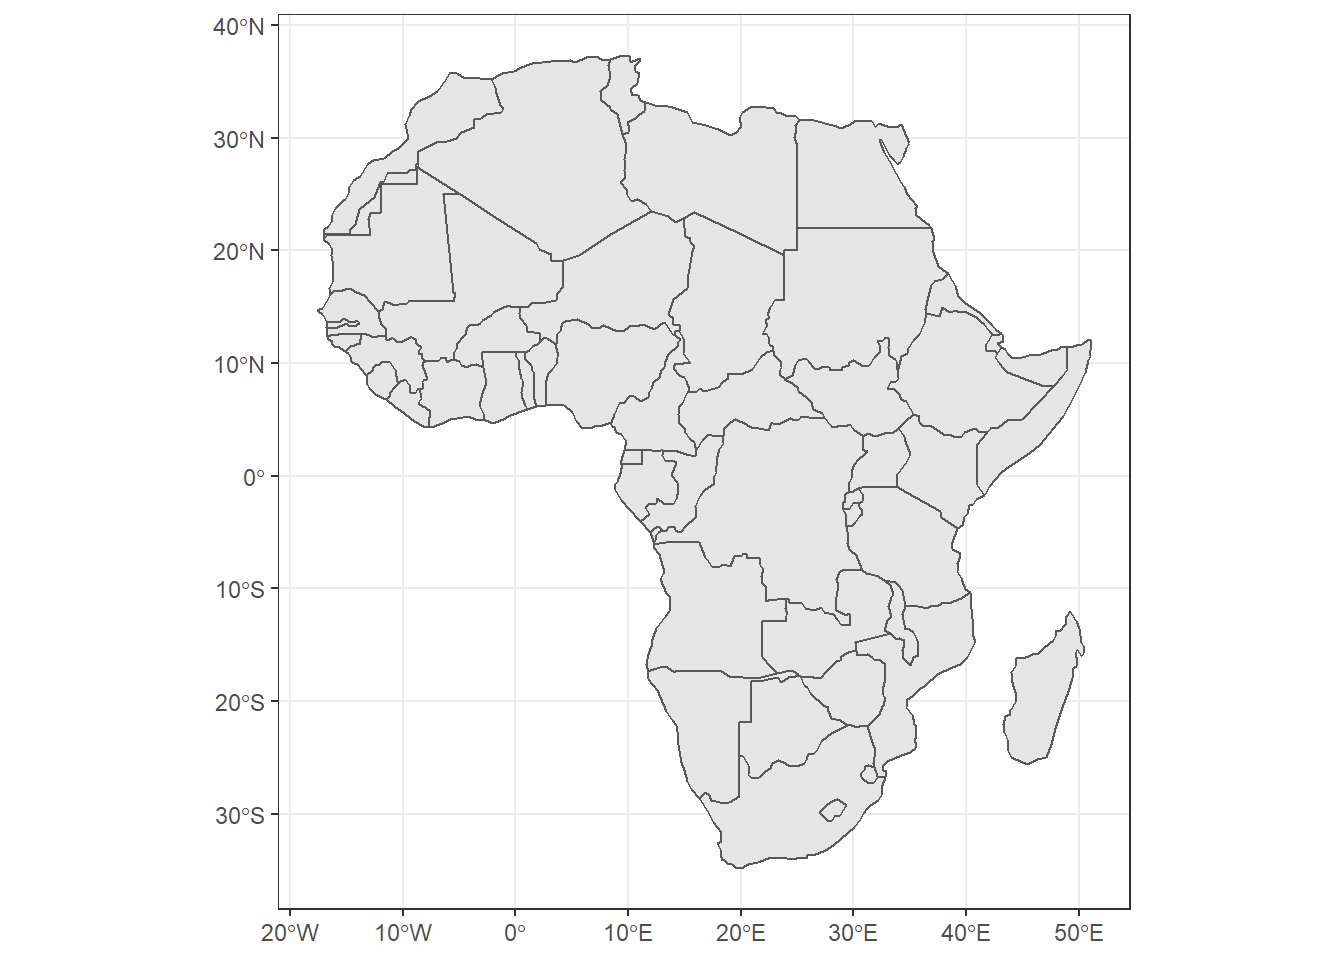 Basim map of countries in Africa. Source:rnaturalearth R package